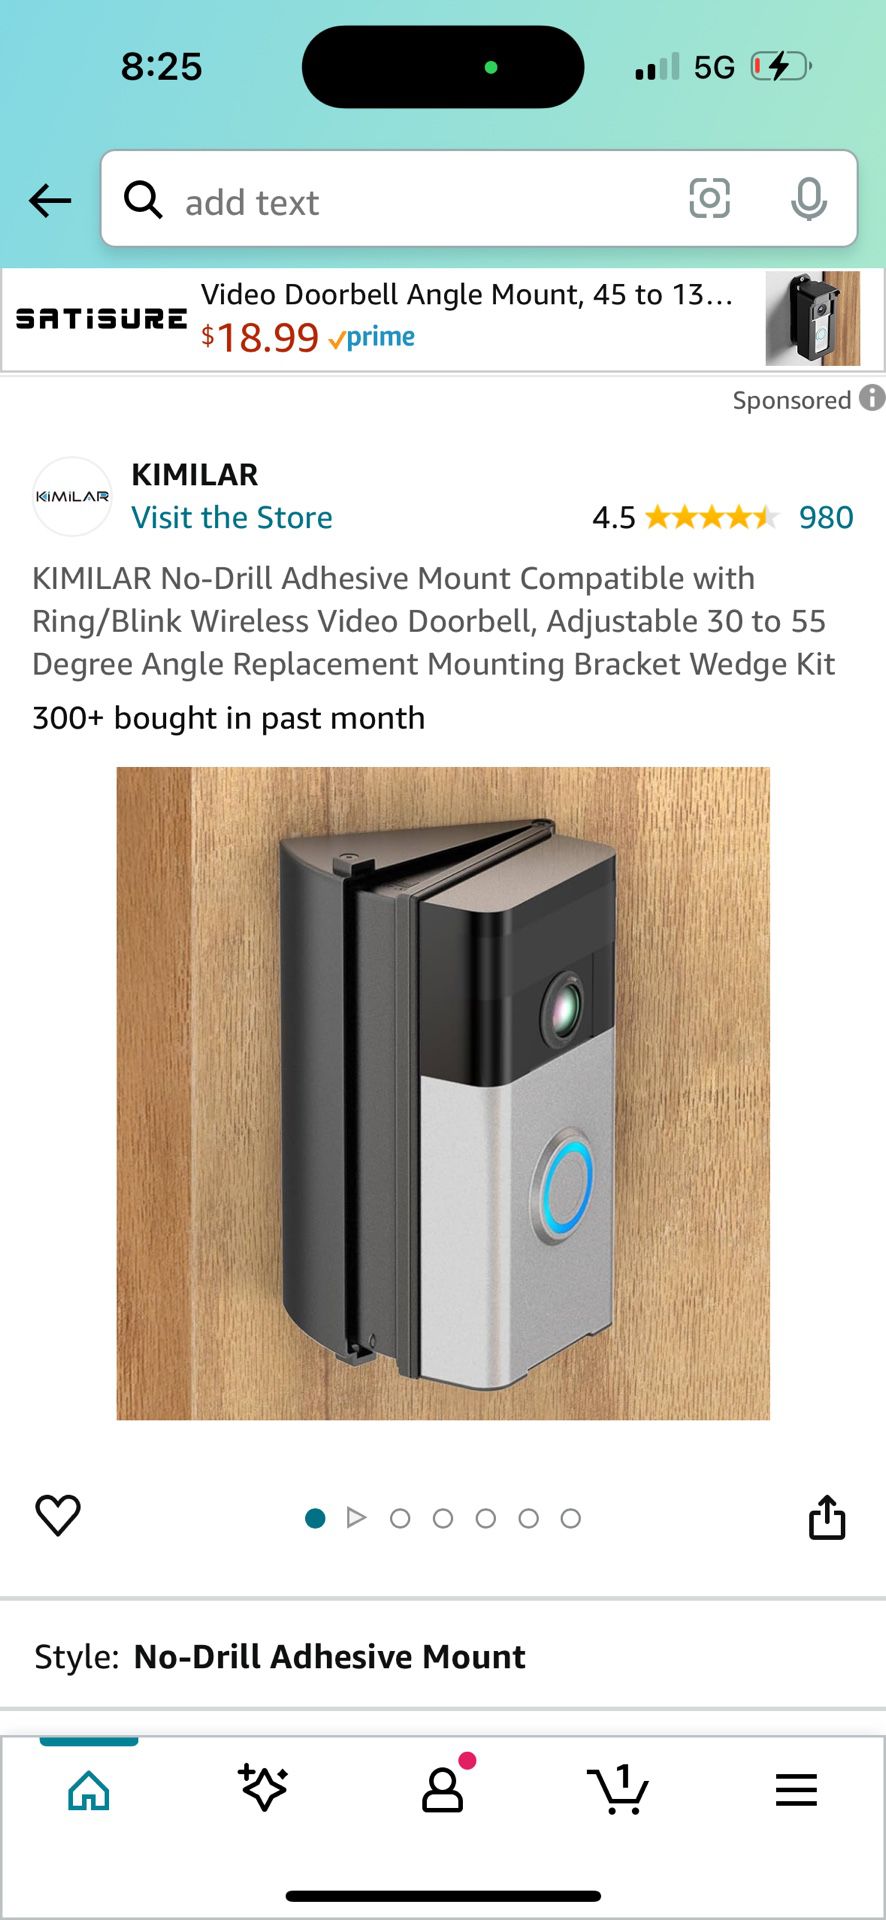 KIMILAR No-Drill Adhesive Mount Compatible with Ring/Blink Wireless Video Doorbell